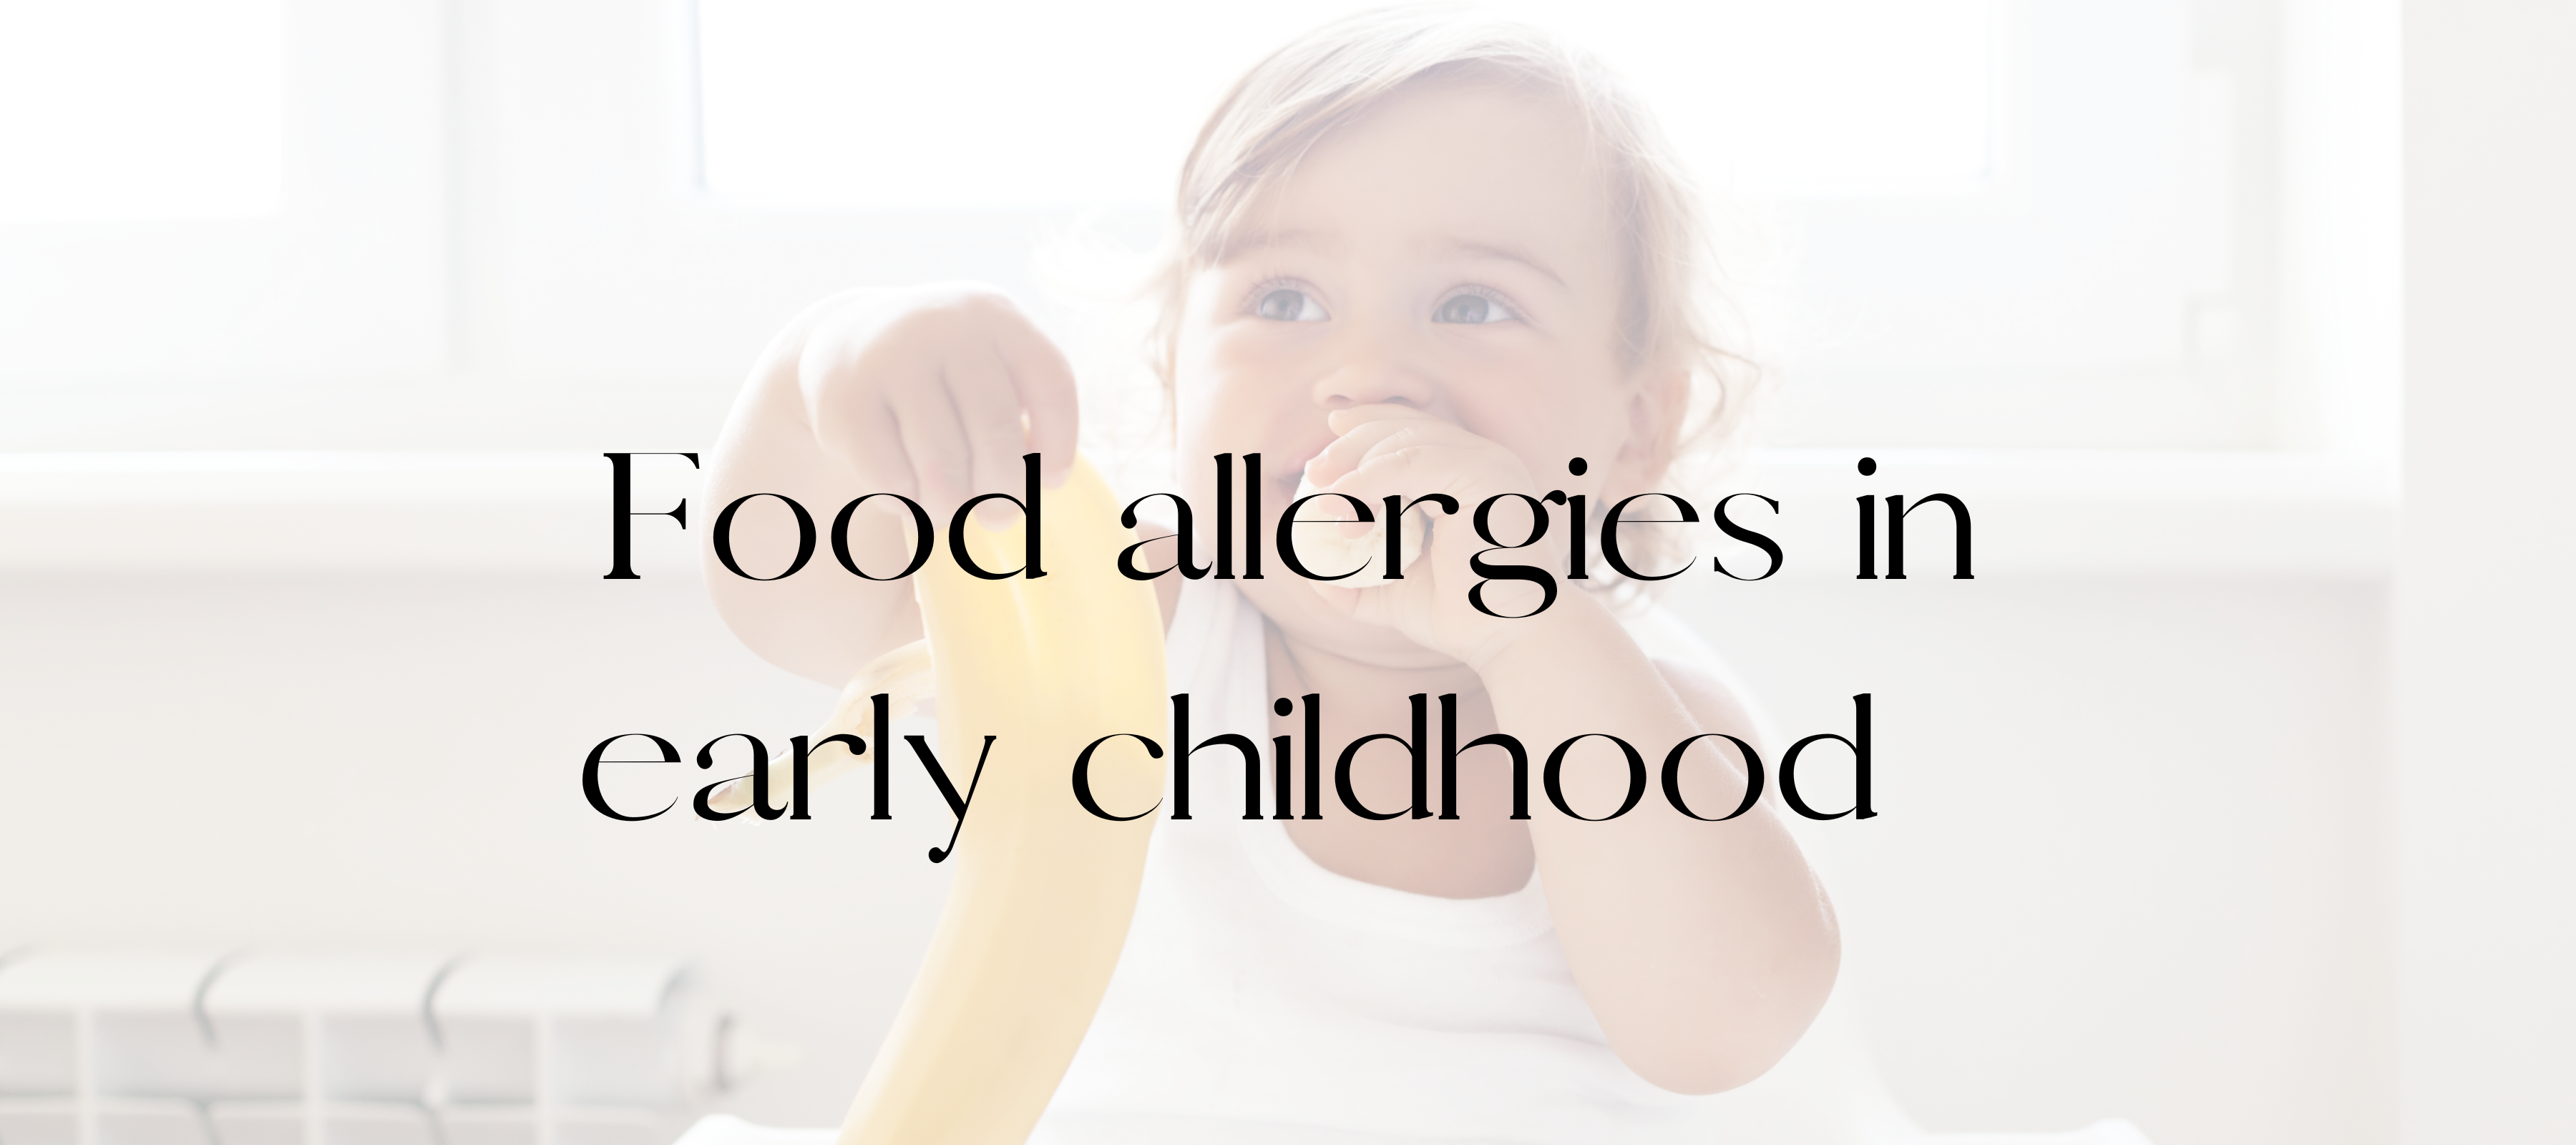 Food allergies in early childhood